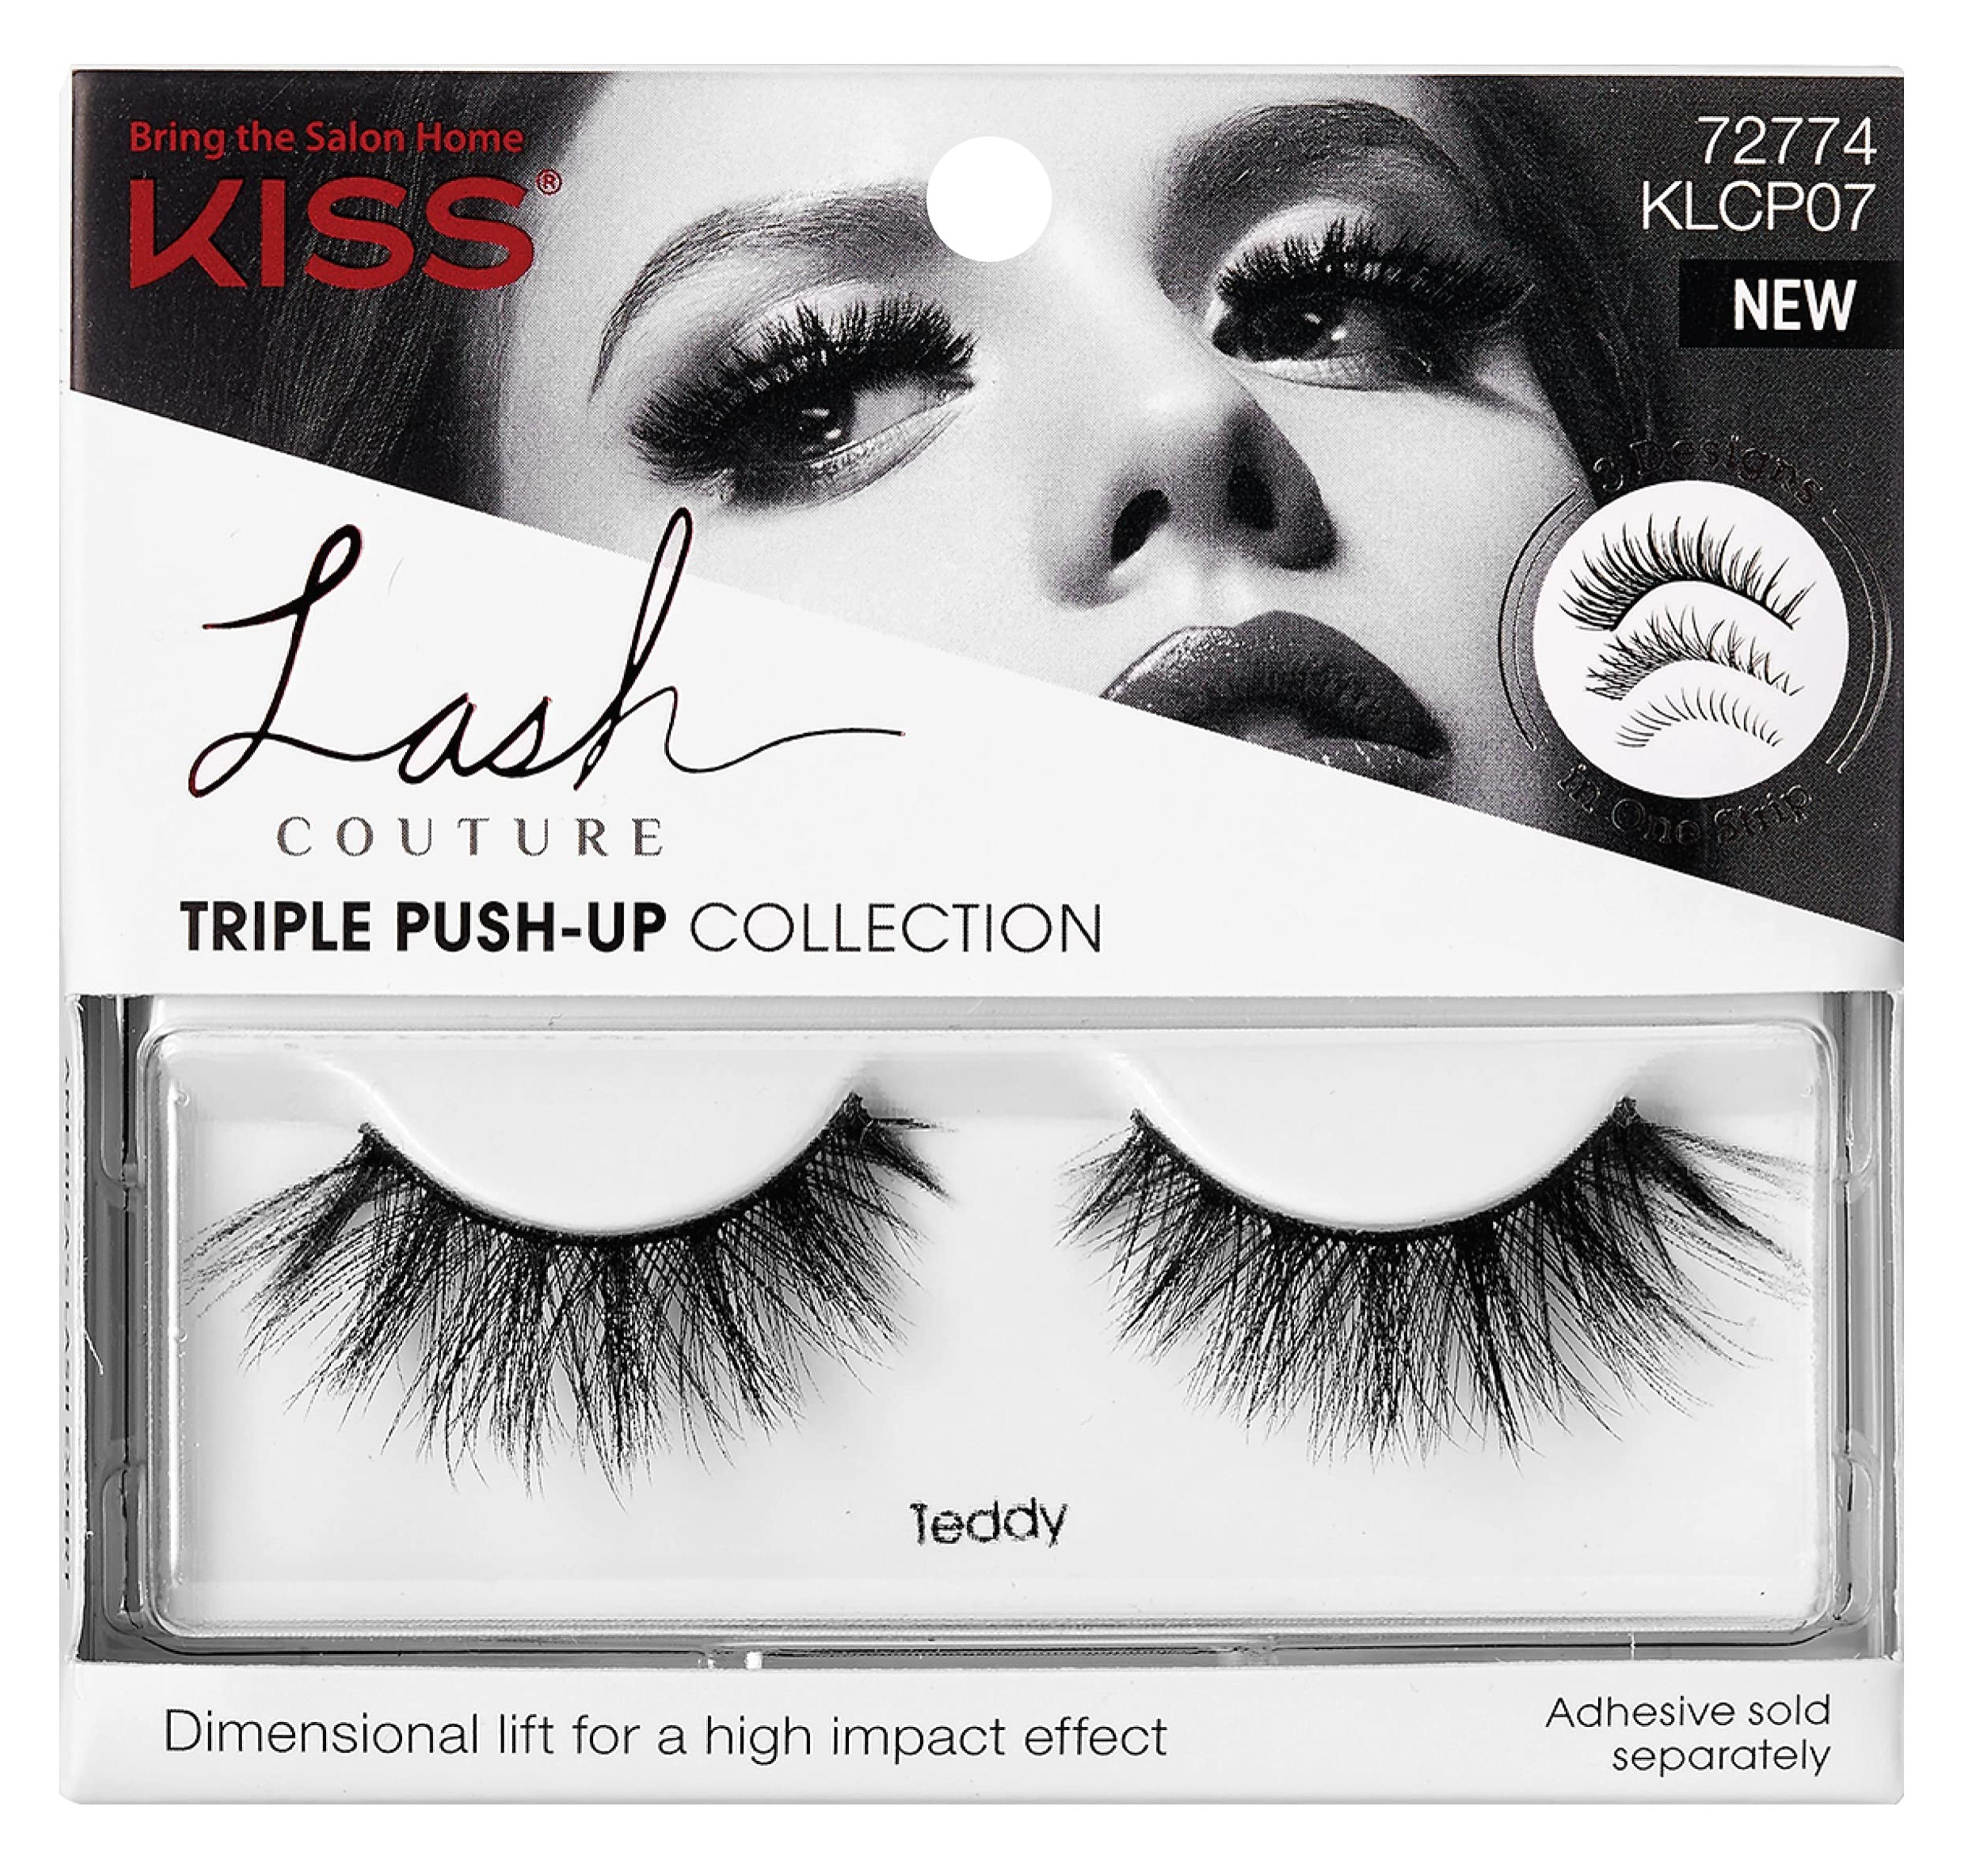 KISS Lash Couture Triple Push Up Collection, 3D Volume False Eyelashes with Triple Design Technology, Multi-Angles & Lengths, Cruelty-Free, Contact Lens Friendly, and Reusable, Style Teddy, 1 Pair